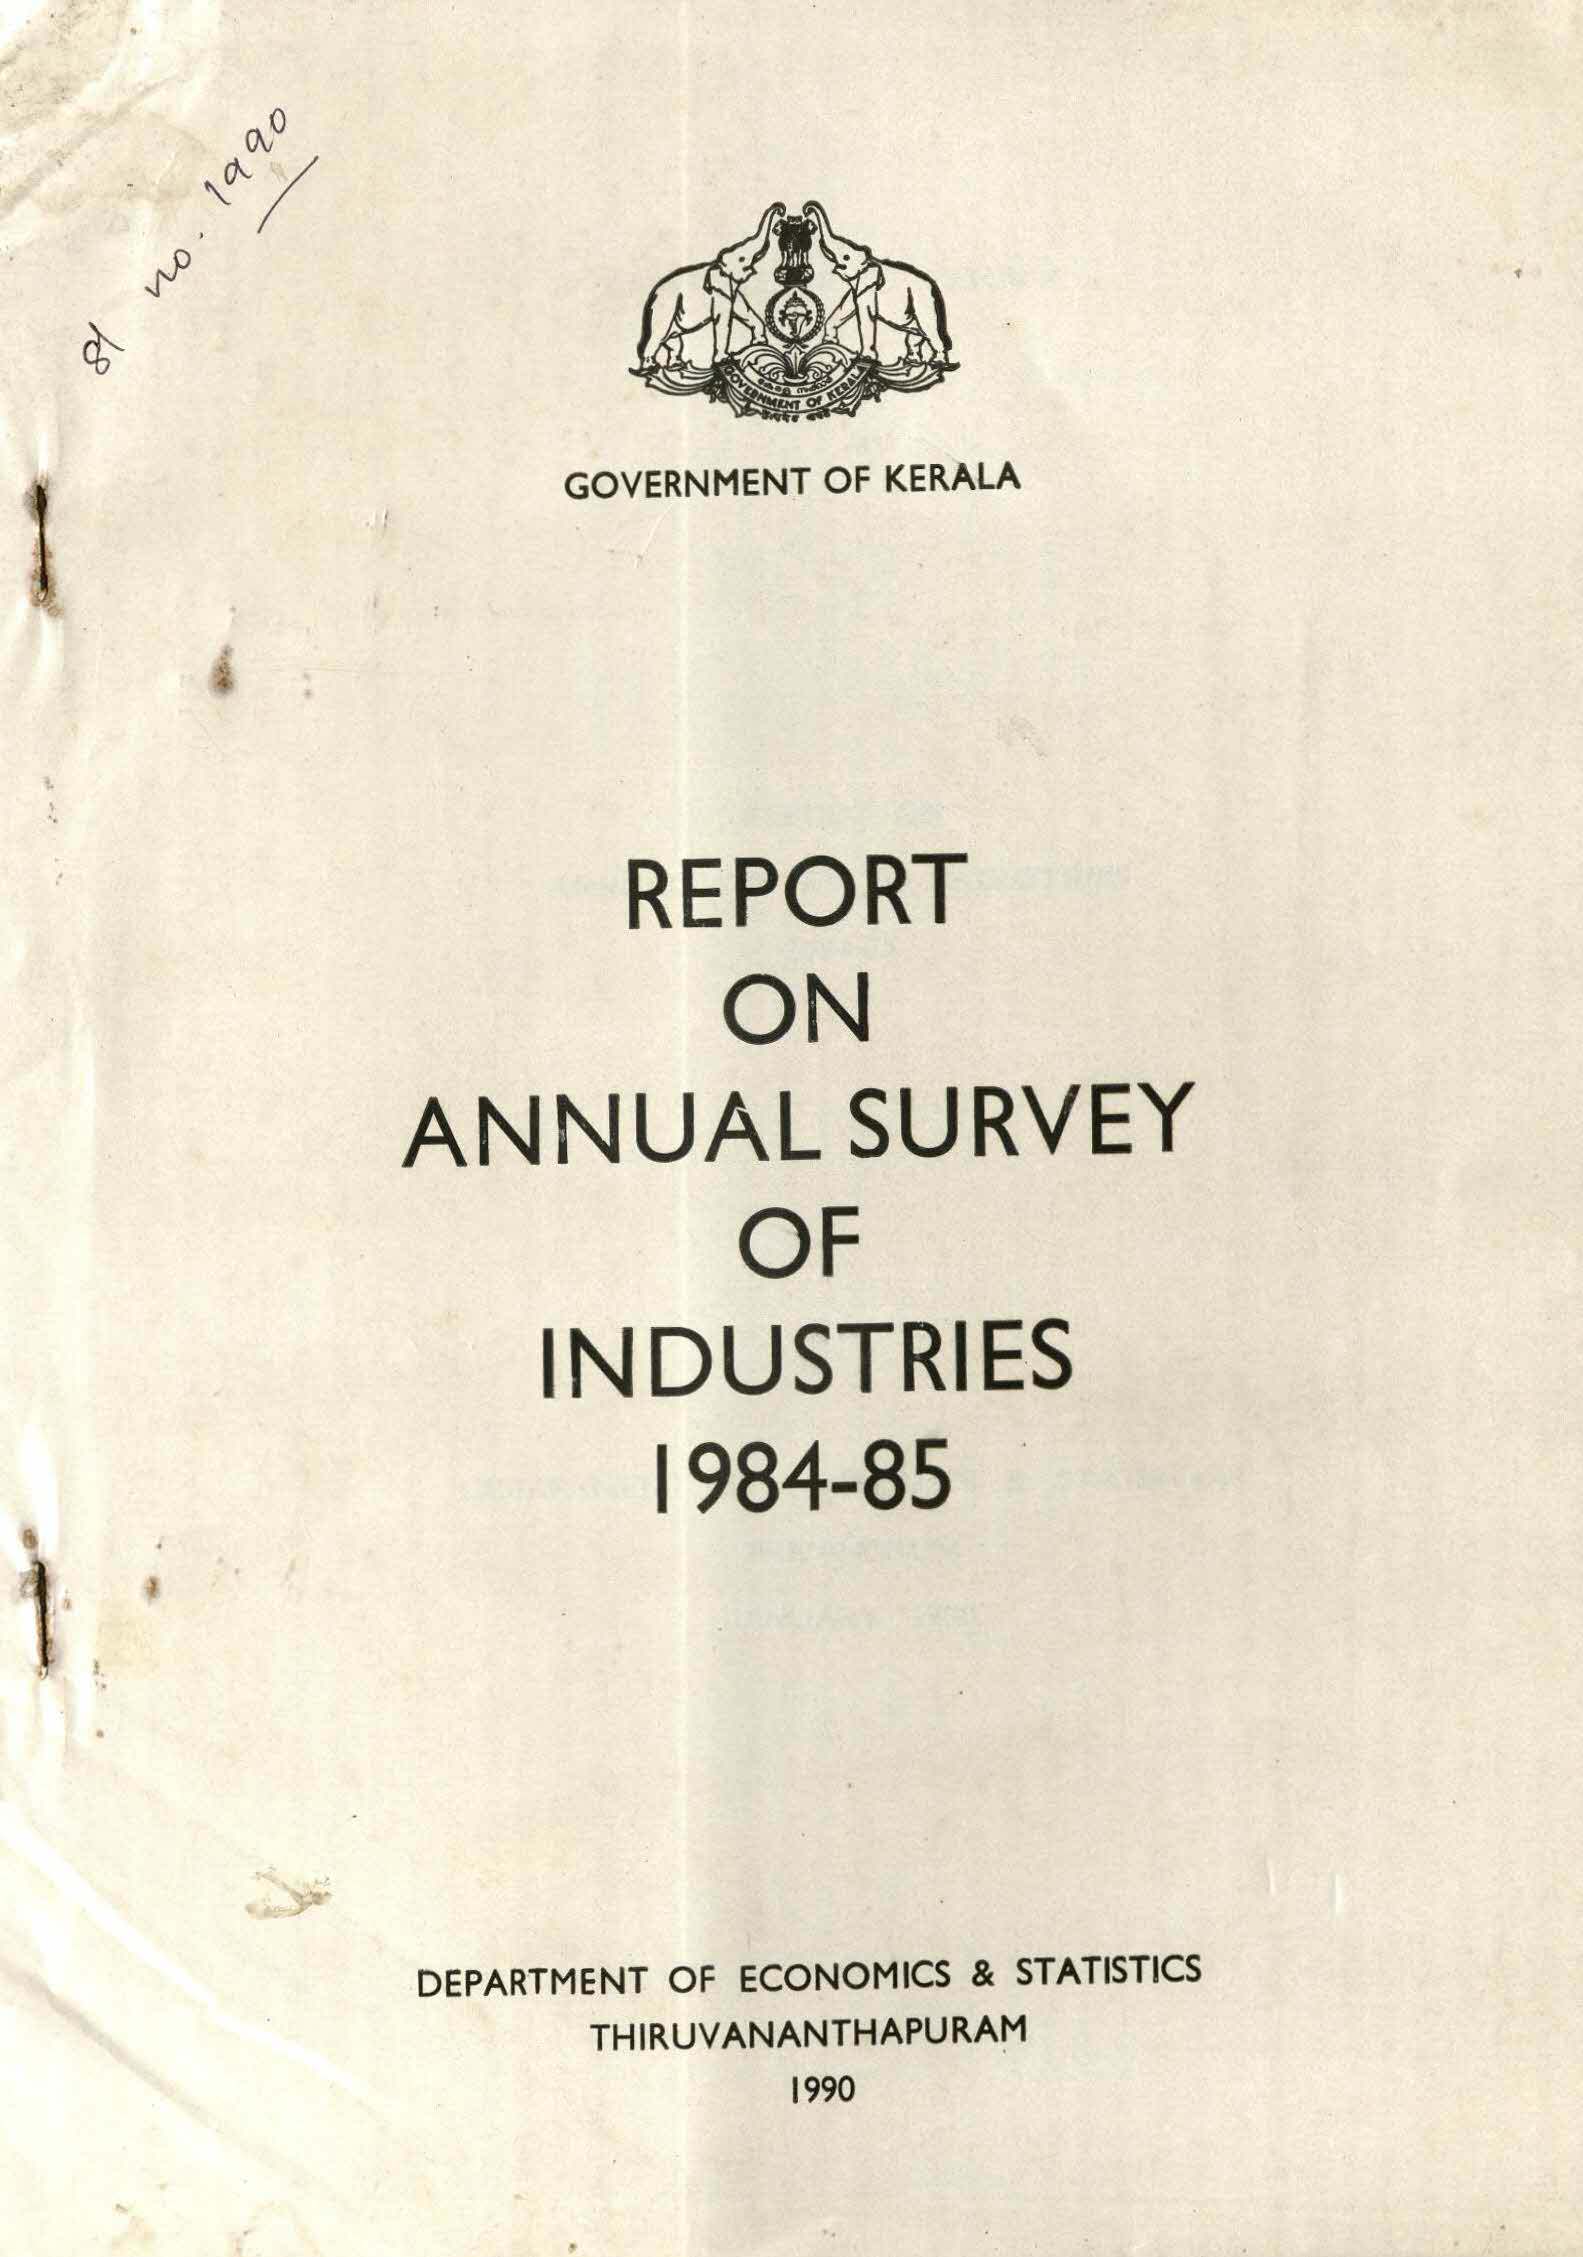 REPORT ON ANNUAL SURVEY OF INDUSTRIES 1984-85